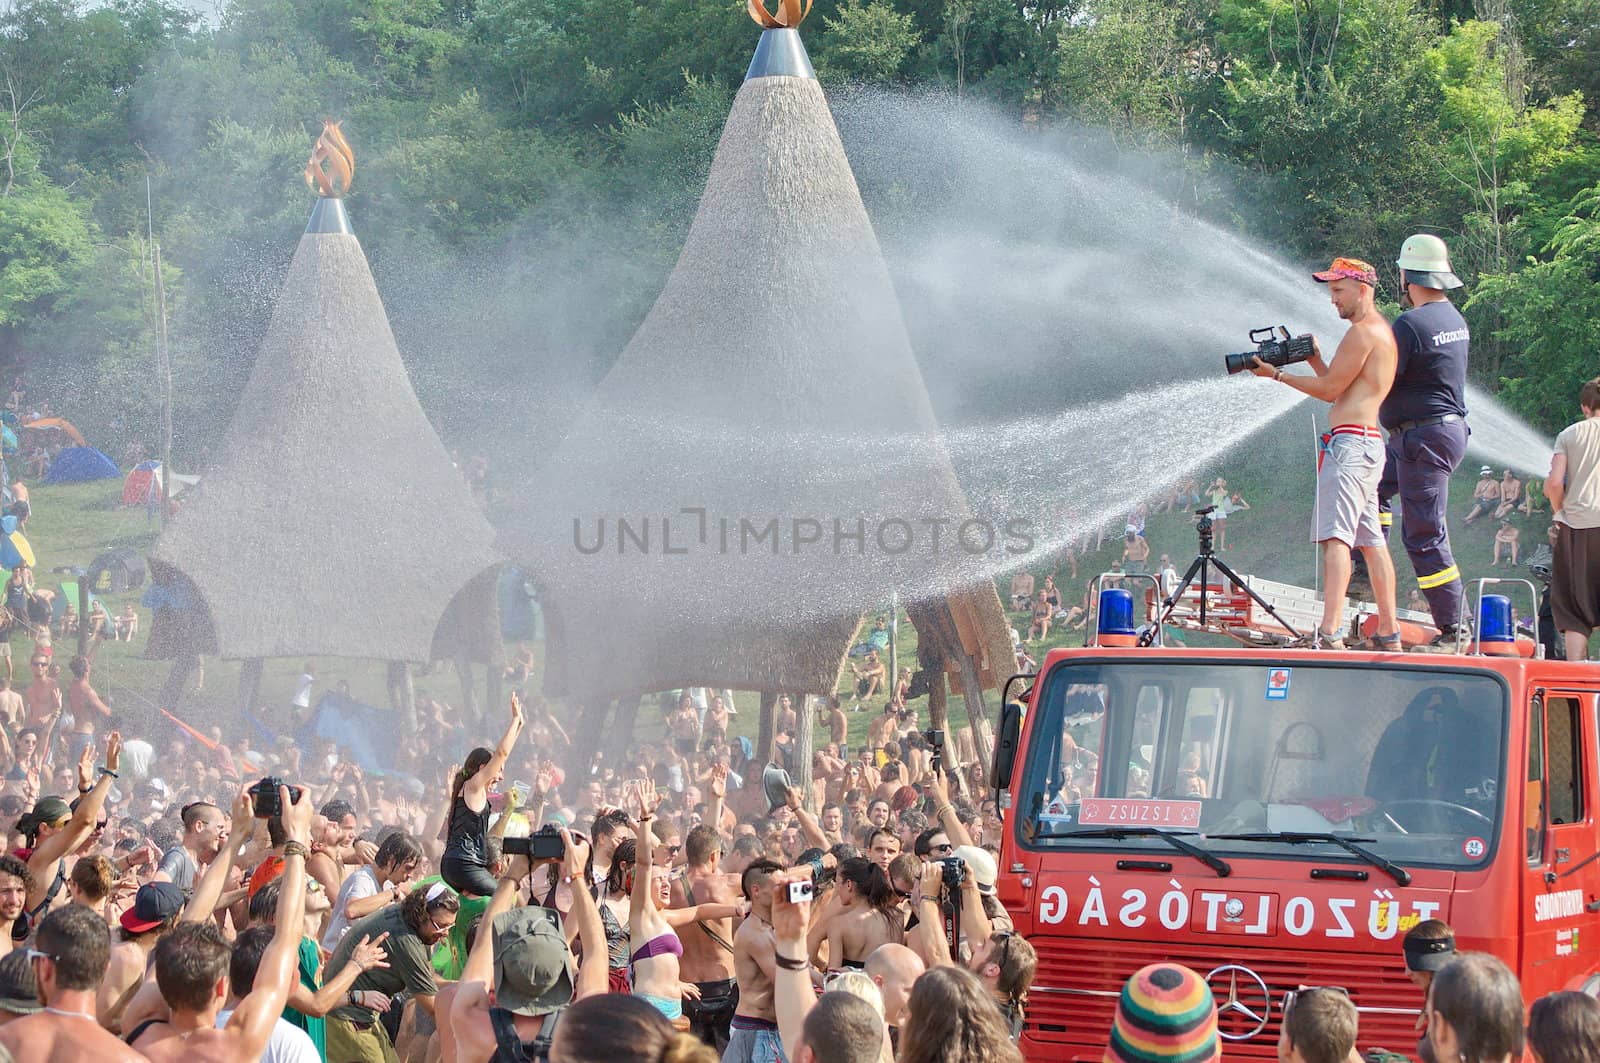 OZORA, HUNGARY - AUGUST 01: Fire department spray water on crowd by anderm